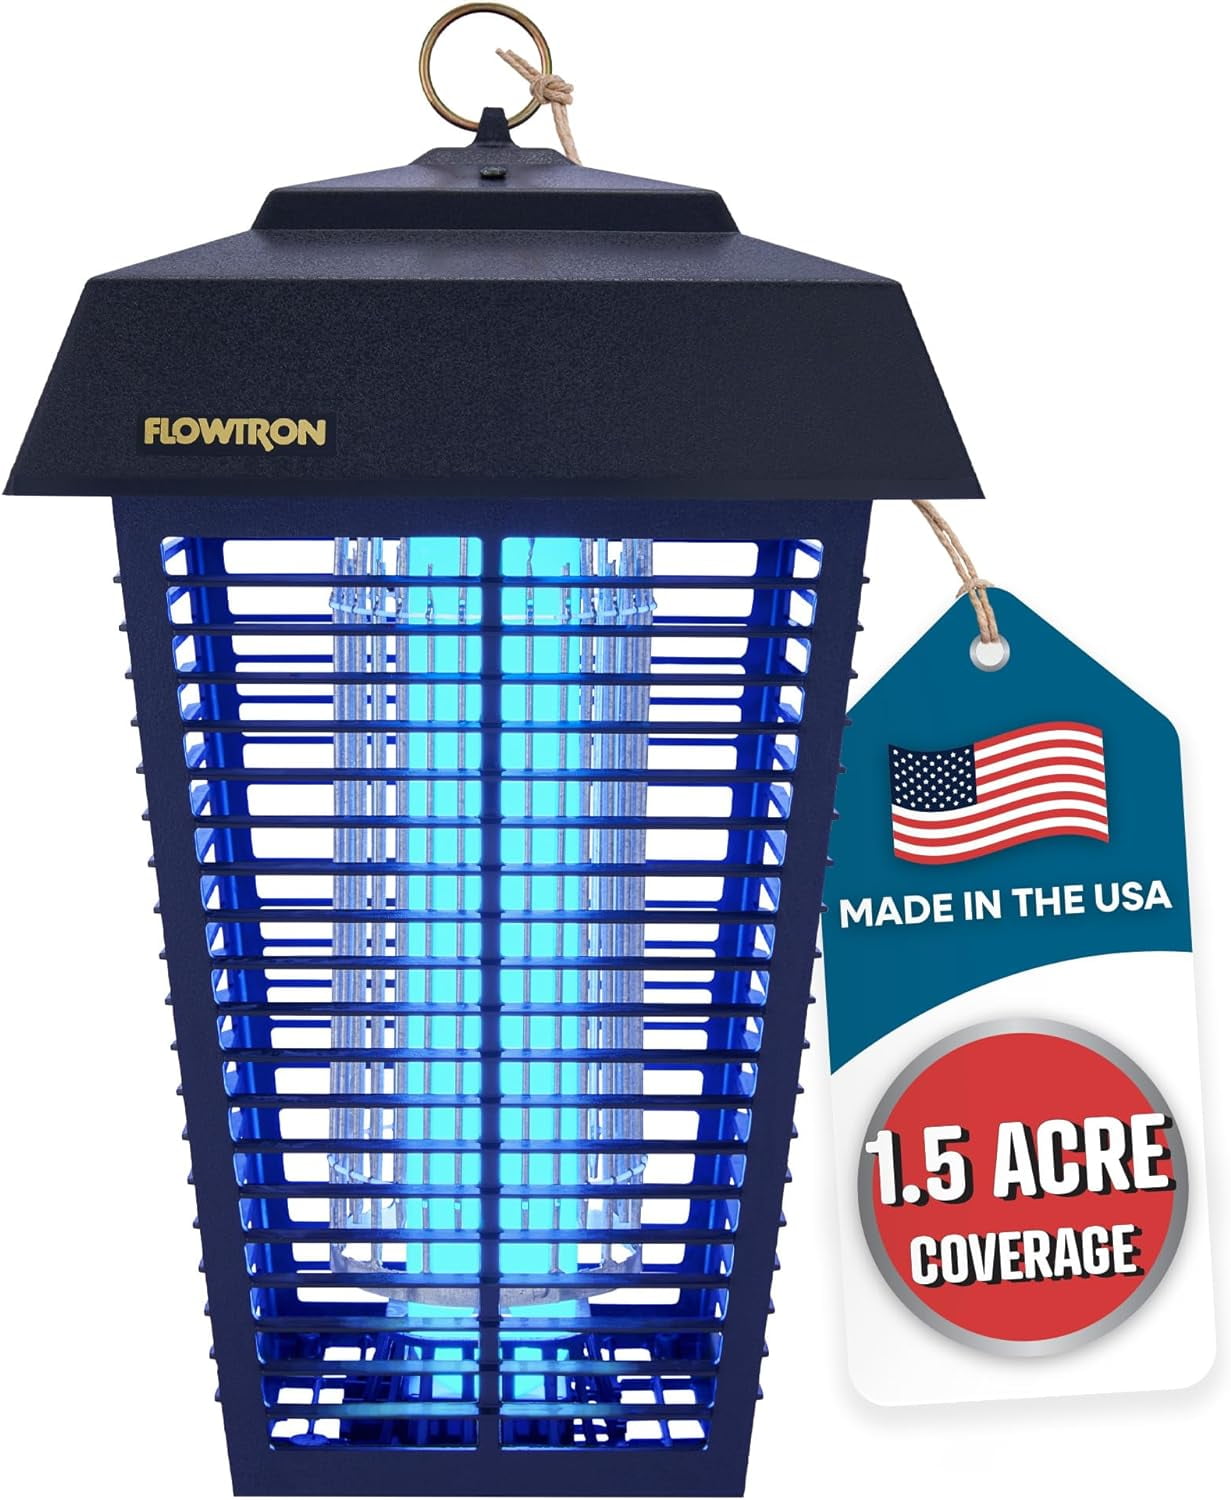 Flowtron BK-80D Outdoor Electronic Insect Killer, Black